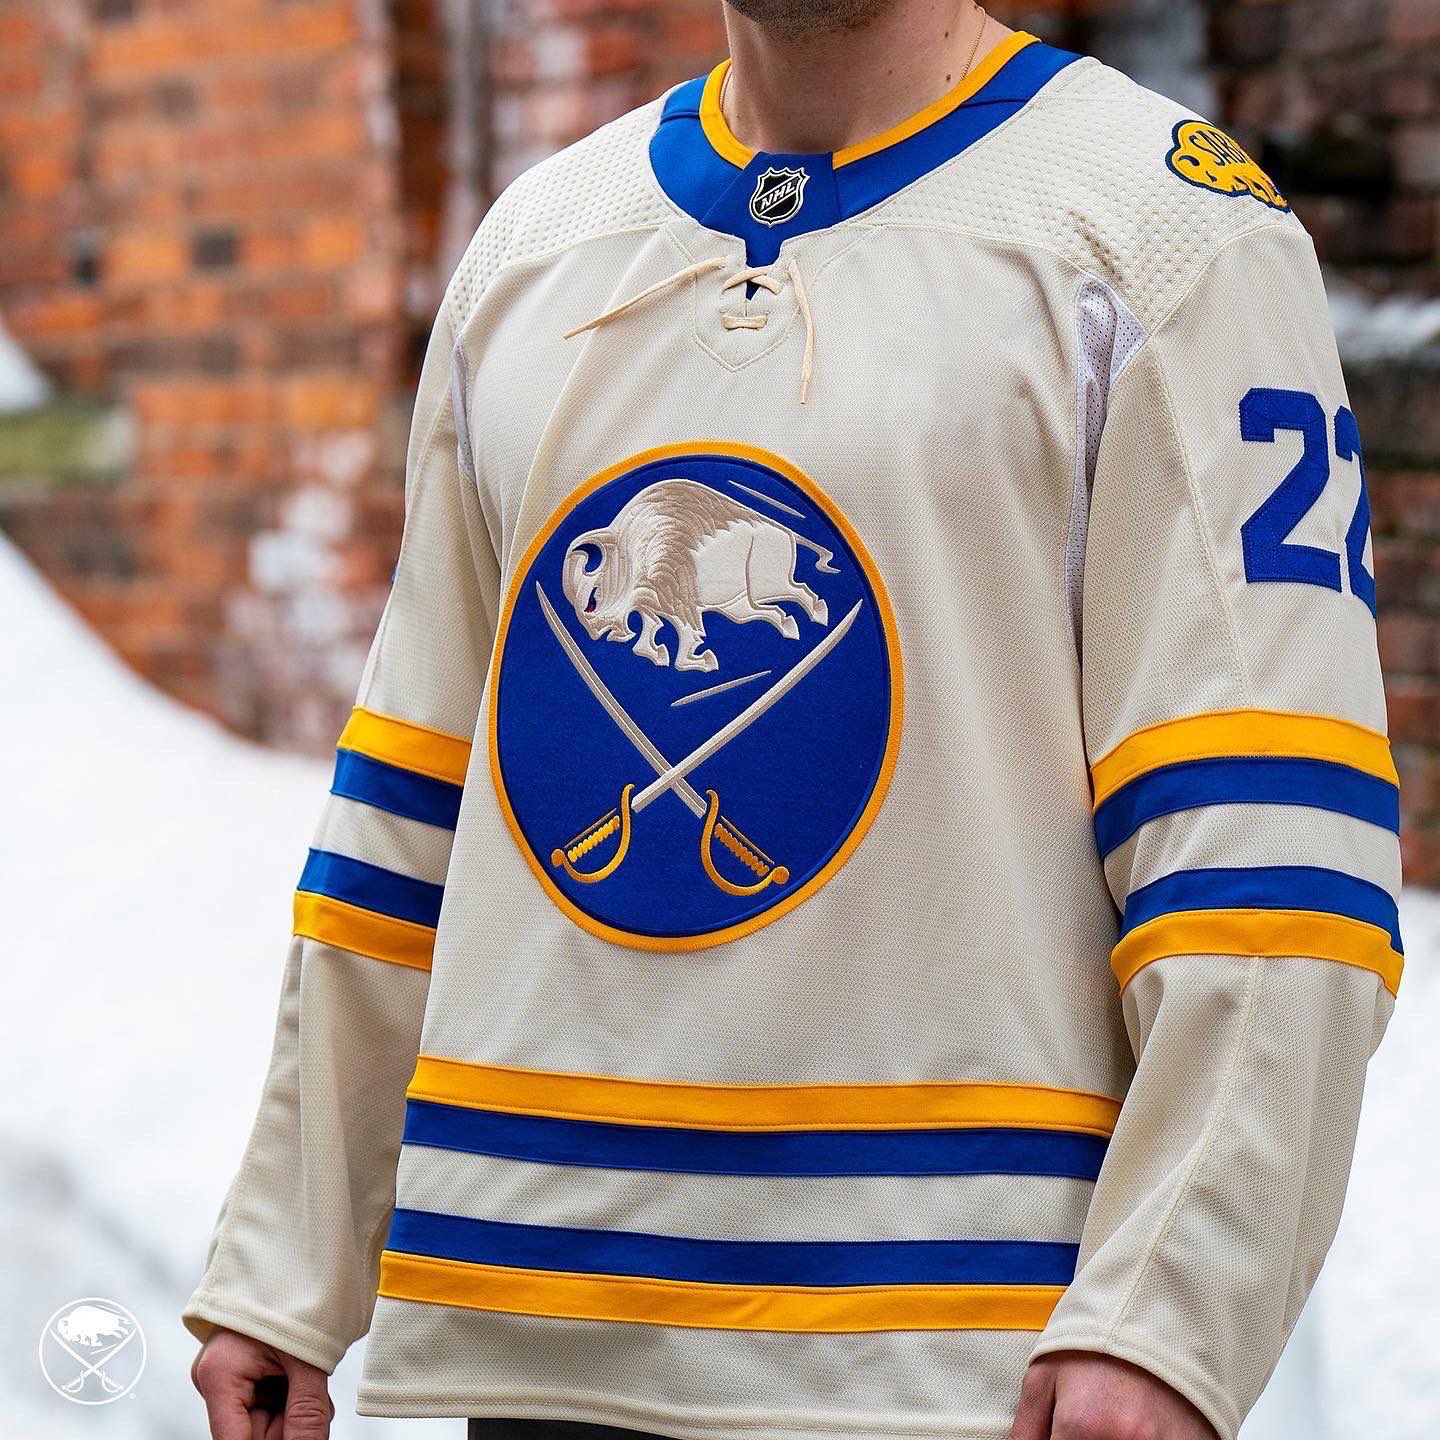 BarDown on X: Thoughts on this Sabres Heritage Classic jersey